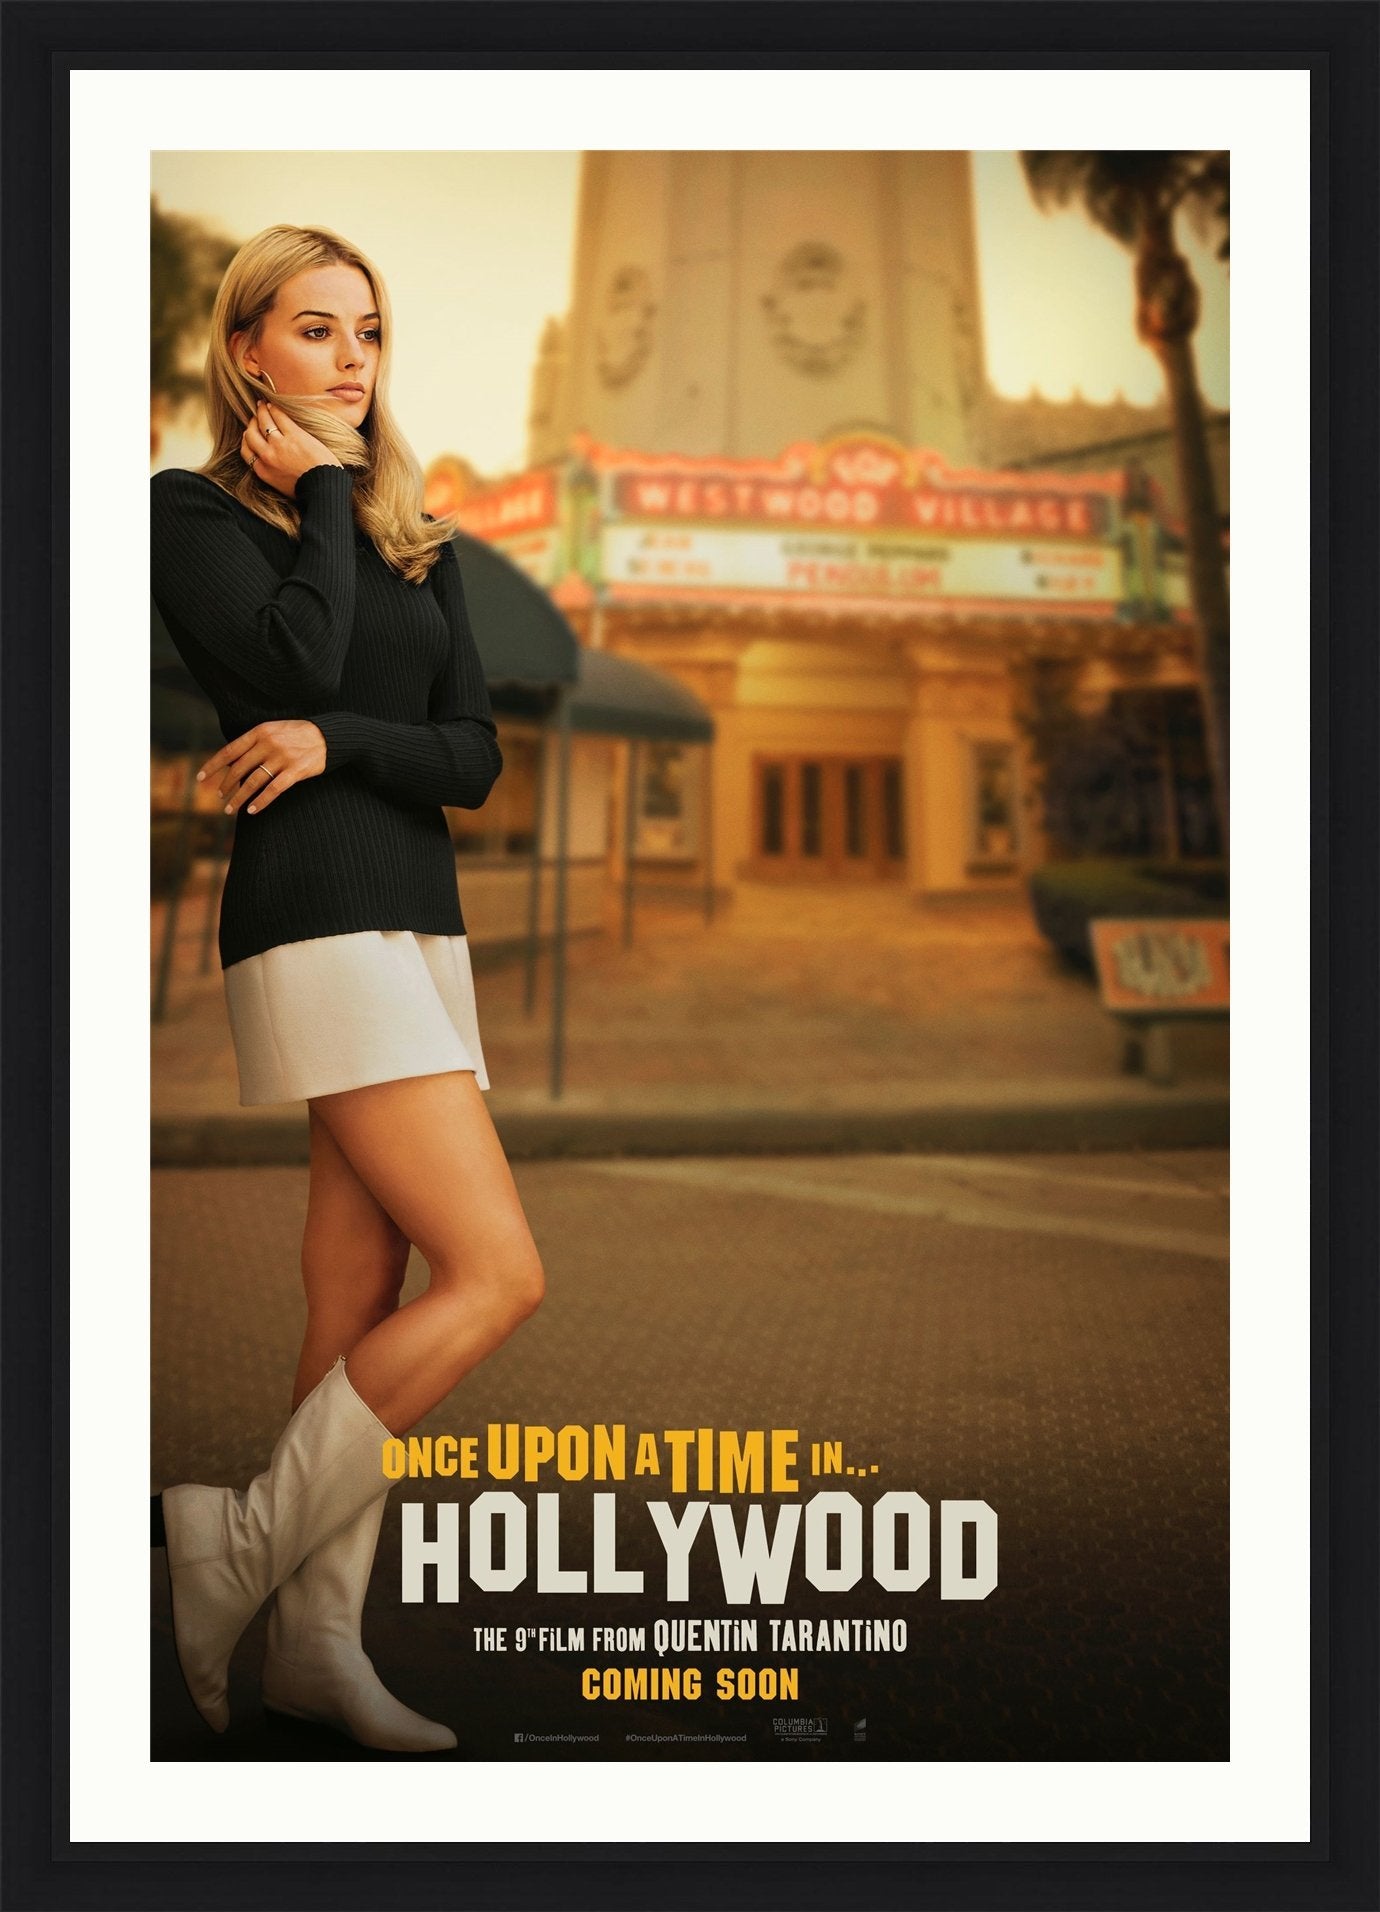 An original movie poster for the Tarantino film Once Upon A Time In Hollywood